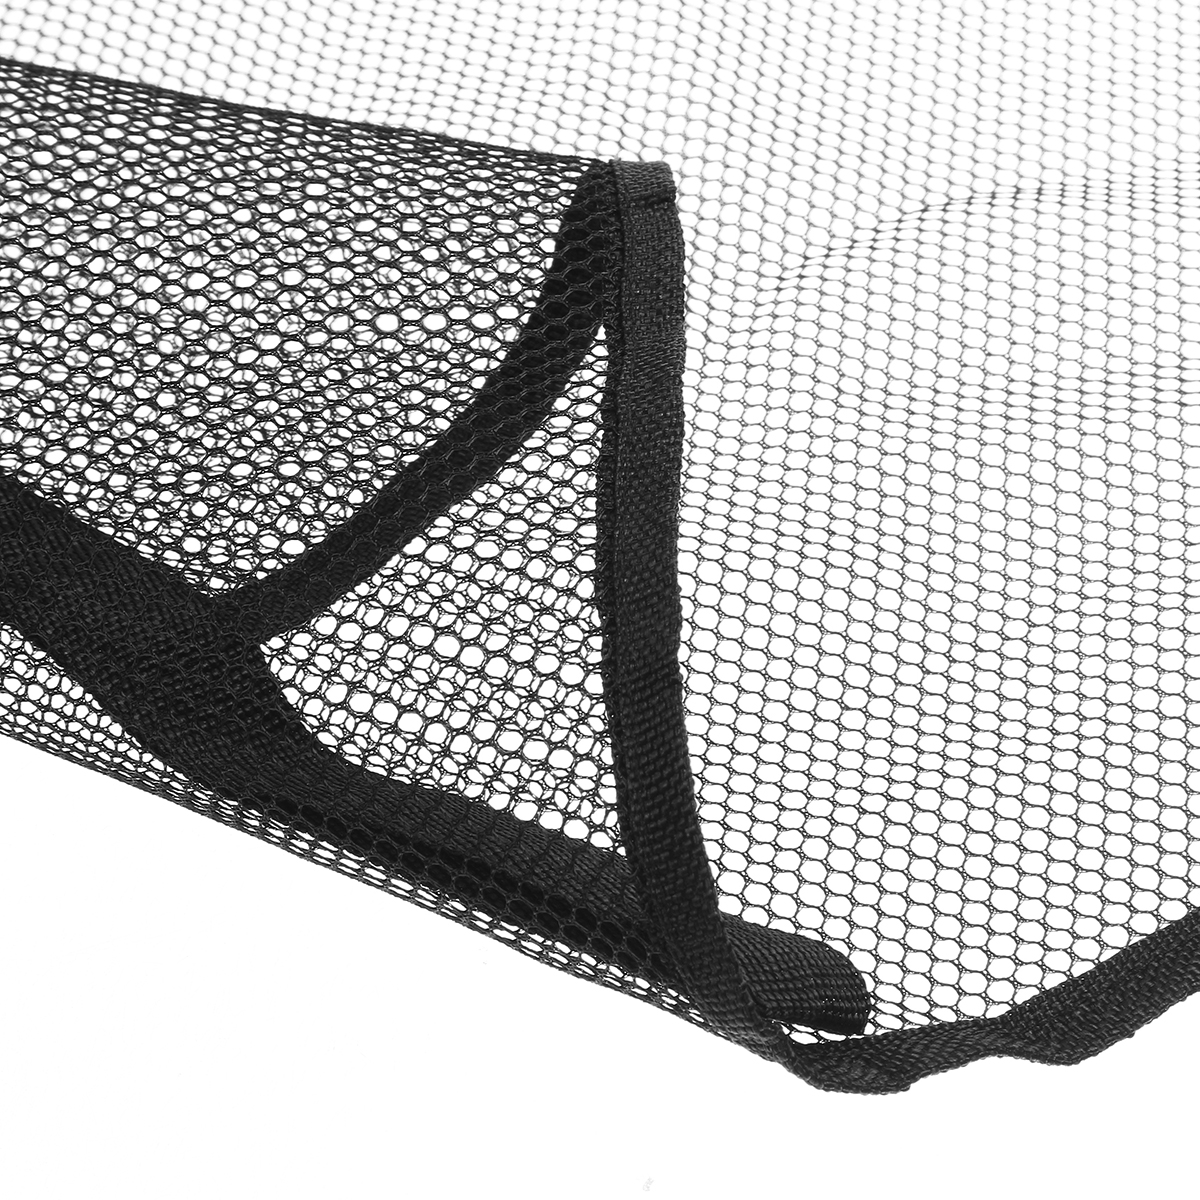 Pool Noodle Chair Net Swimming Bed Seat Floating Chair Net Portable Net Bag for Floating Pool Chairs DIY Accessories